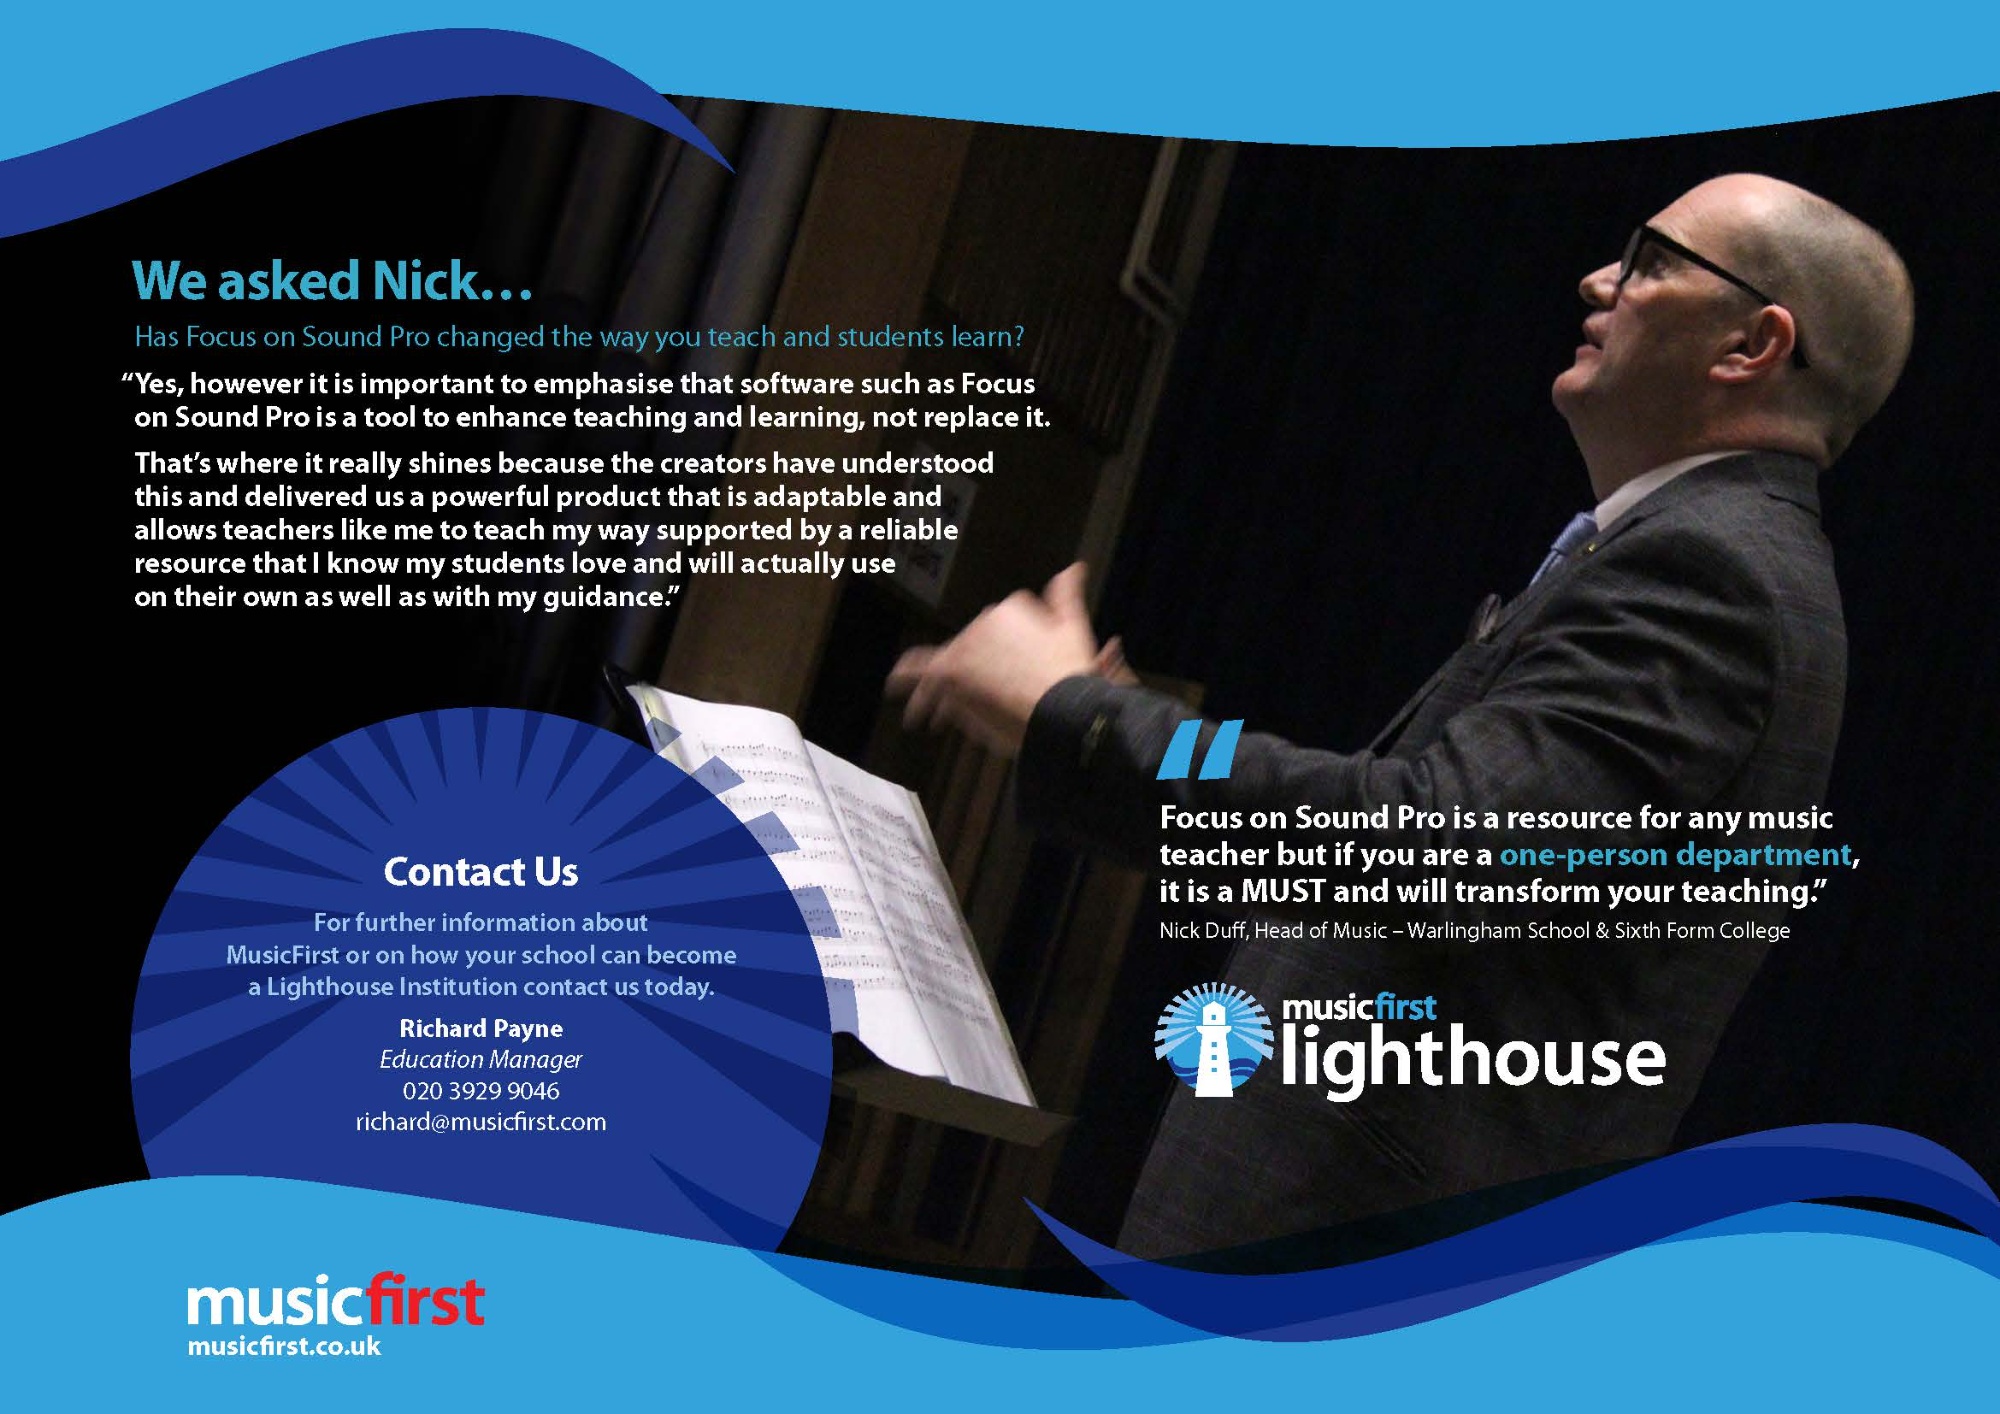 MusicFirst Lighthouse Case Study 